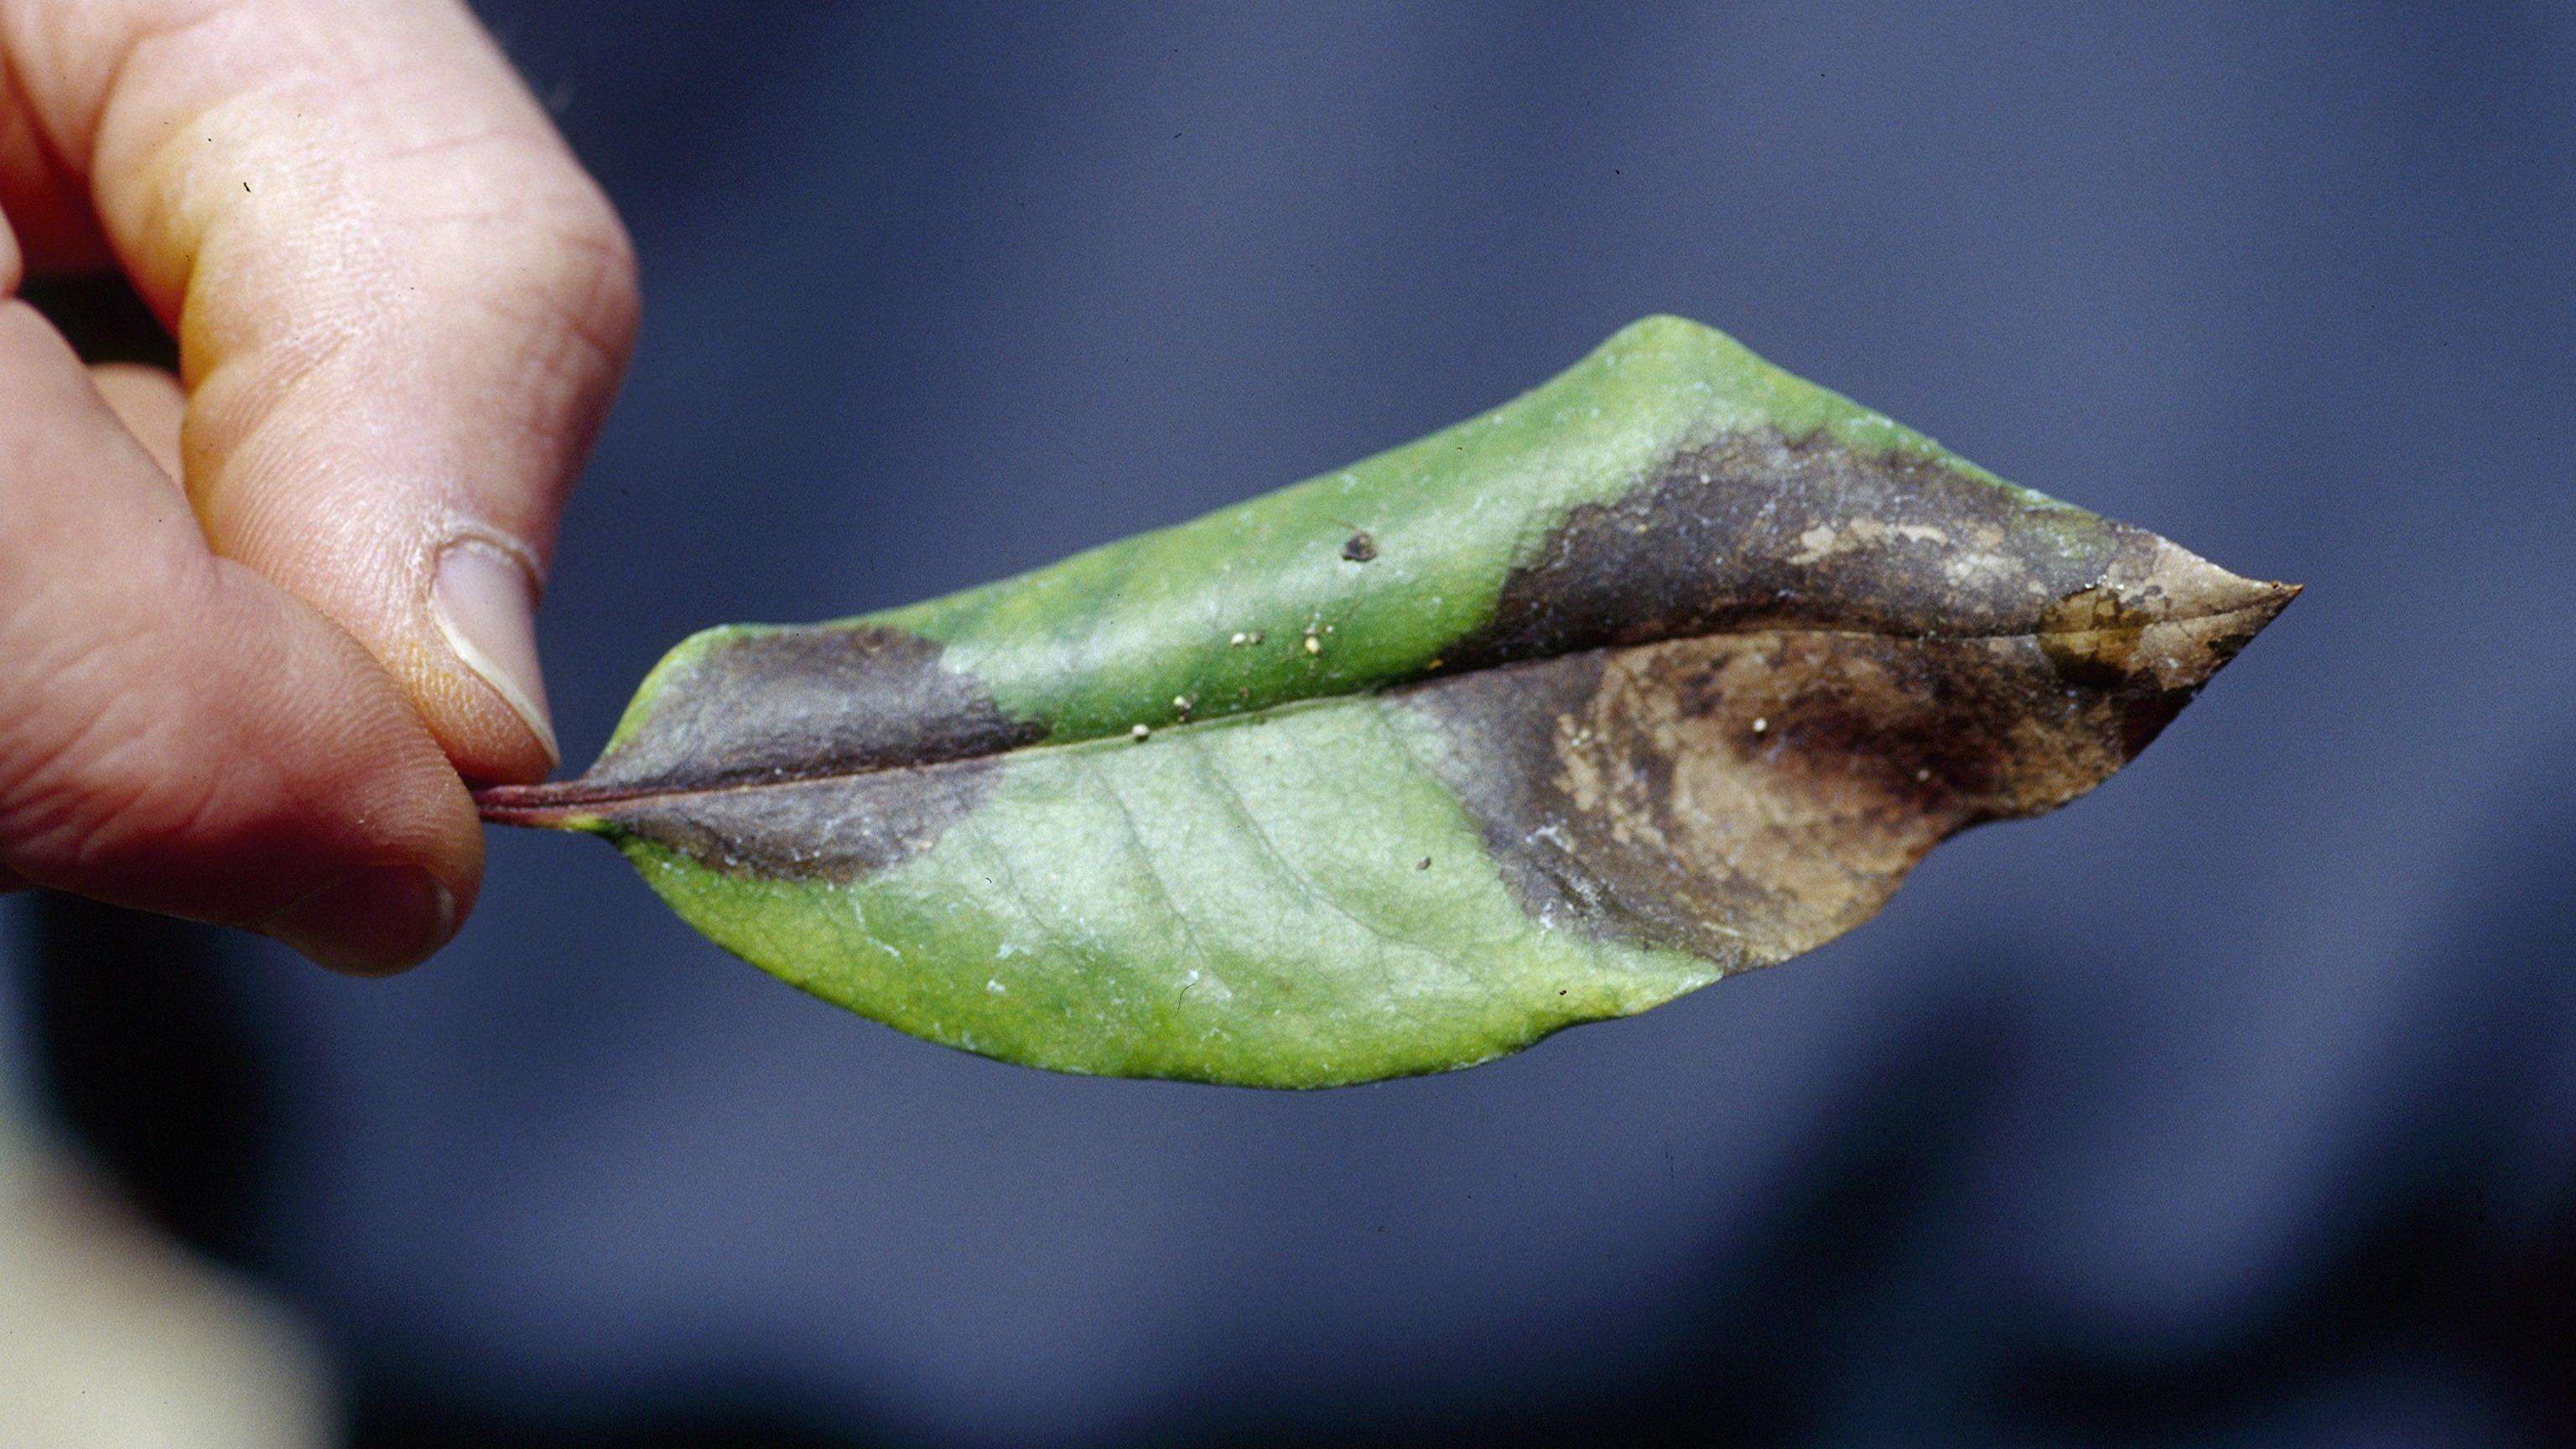 Green, curling rhododendron leaf with black-ish brown spots indicative of phytophthora ramorum infection